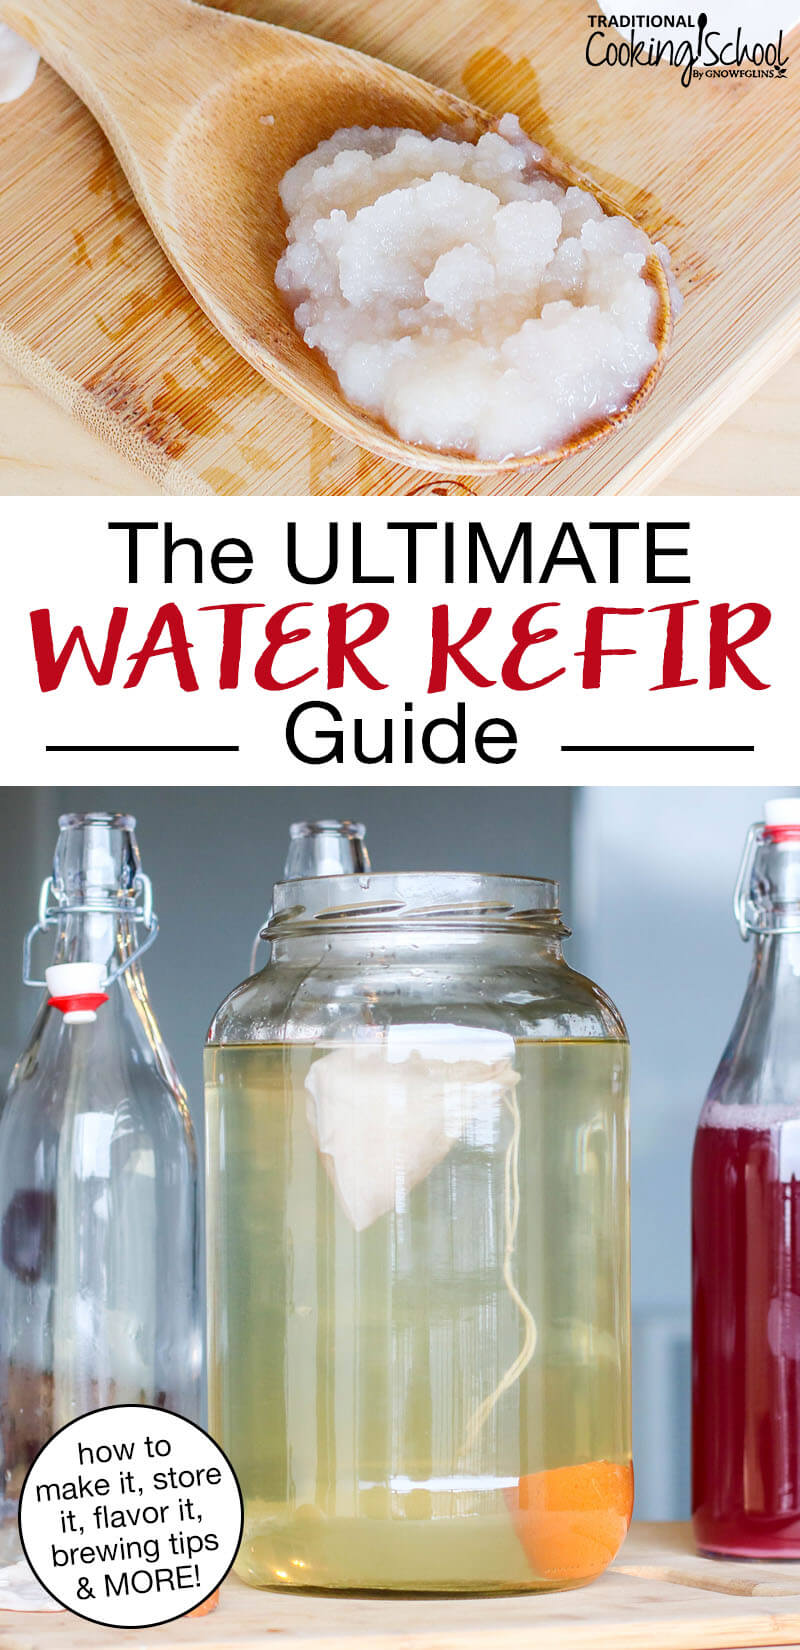 photo collage of water kefir grains and brewing water kefir in glass jars and bottles, including a first and second ferment. Text overlay says: "The ULTIMATE Water Kefir Guide (how to make it, store it, flavor it, brewing tips & MORE!)"